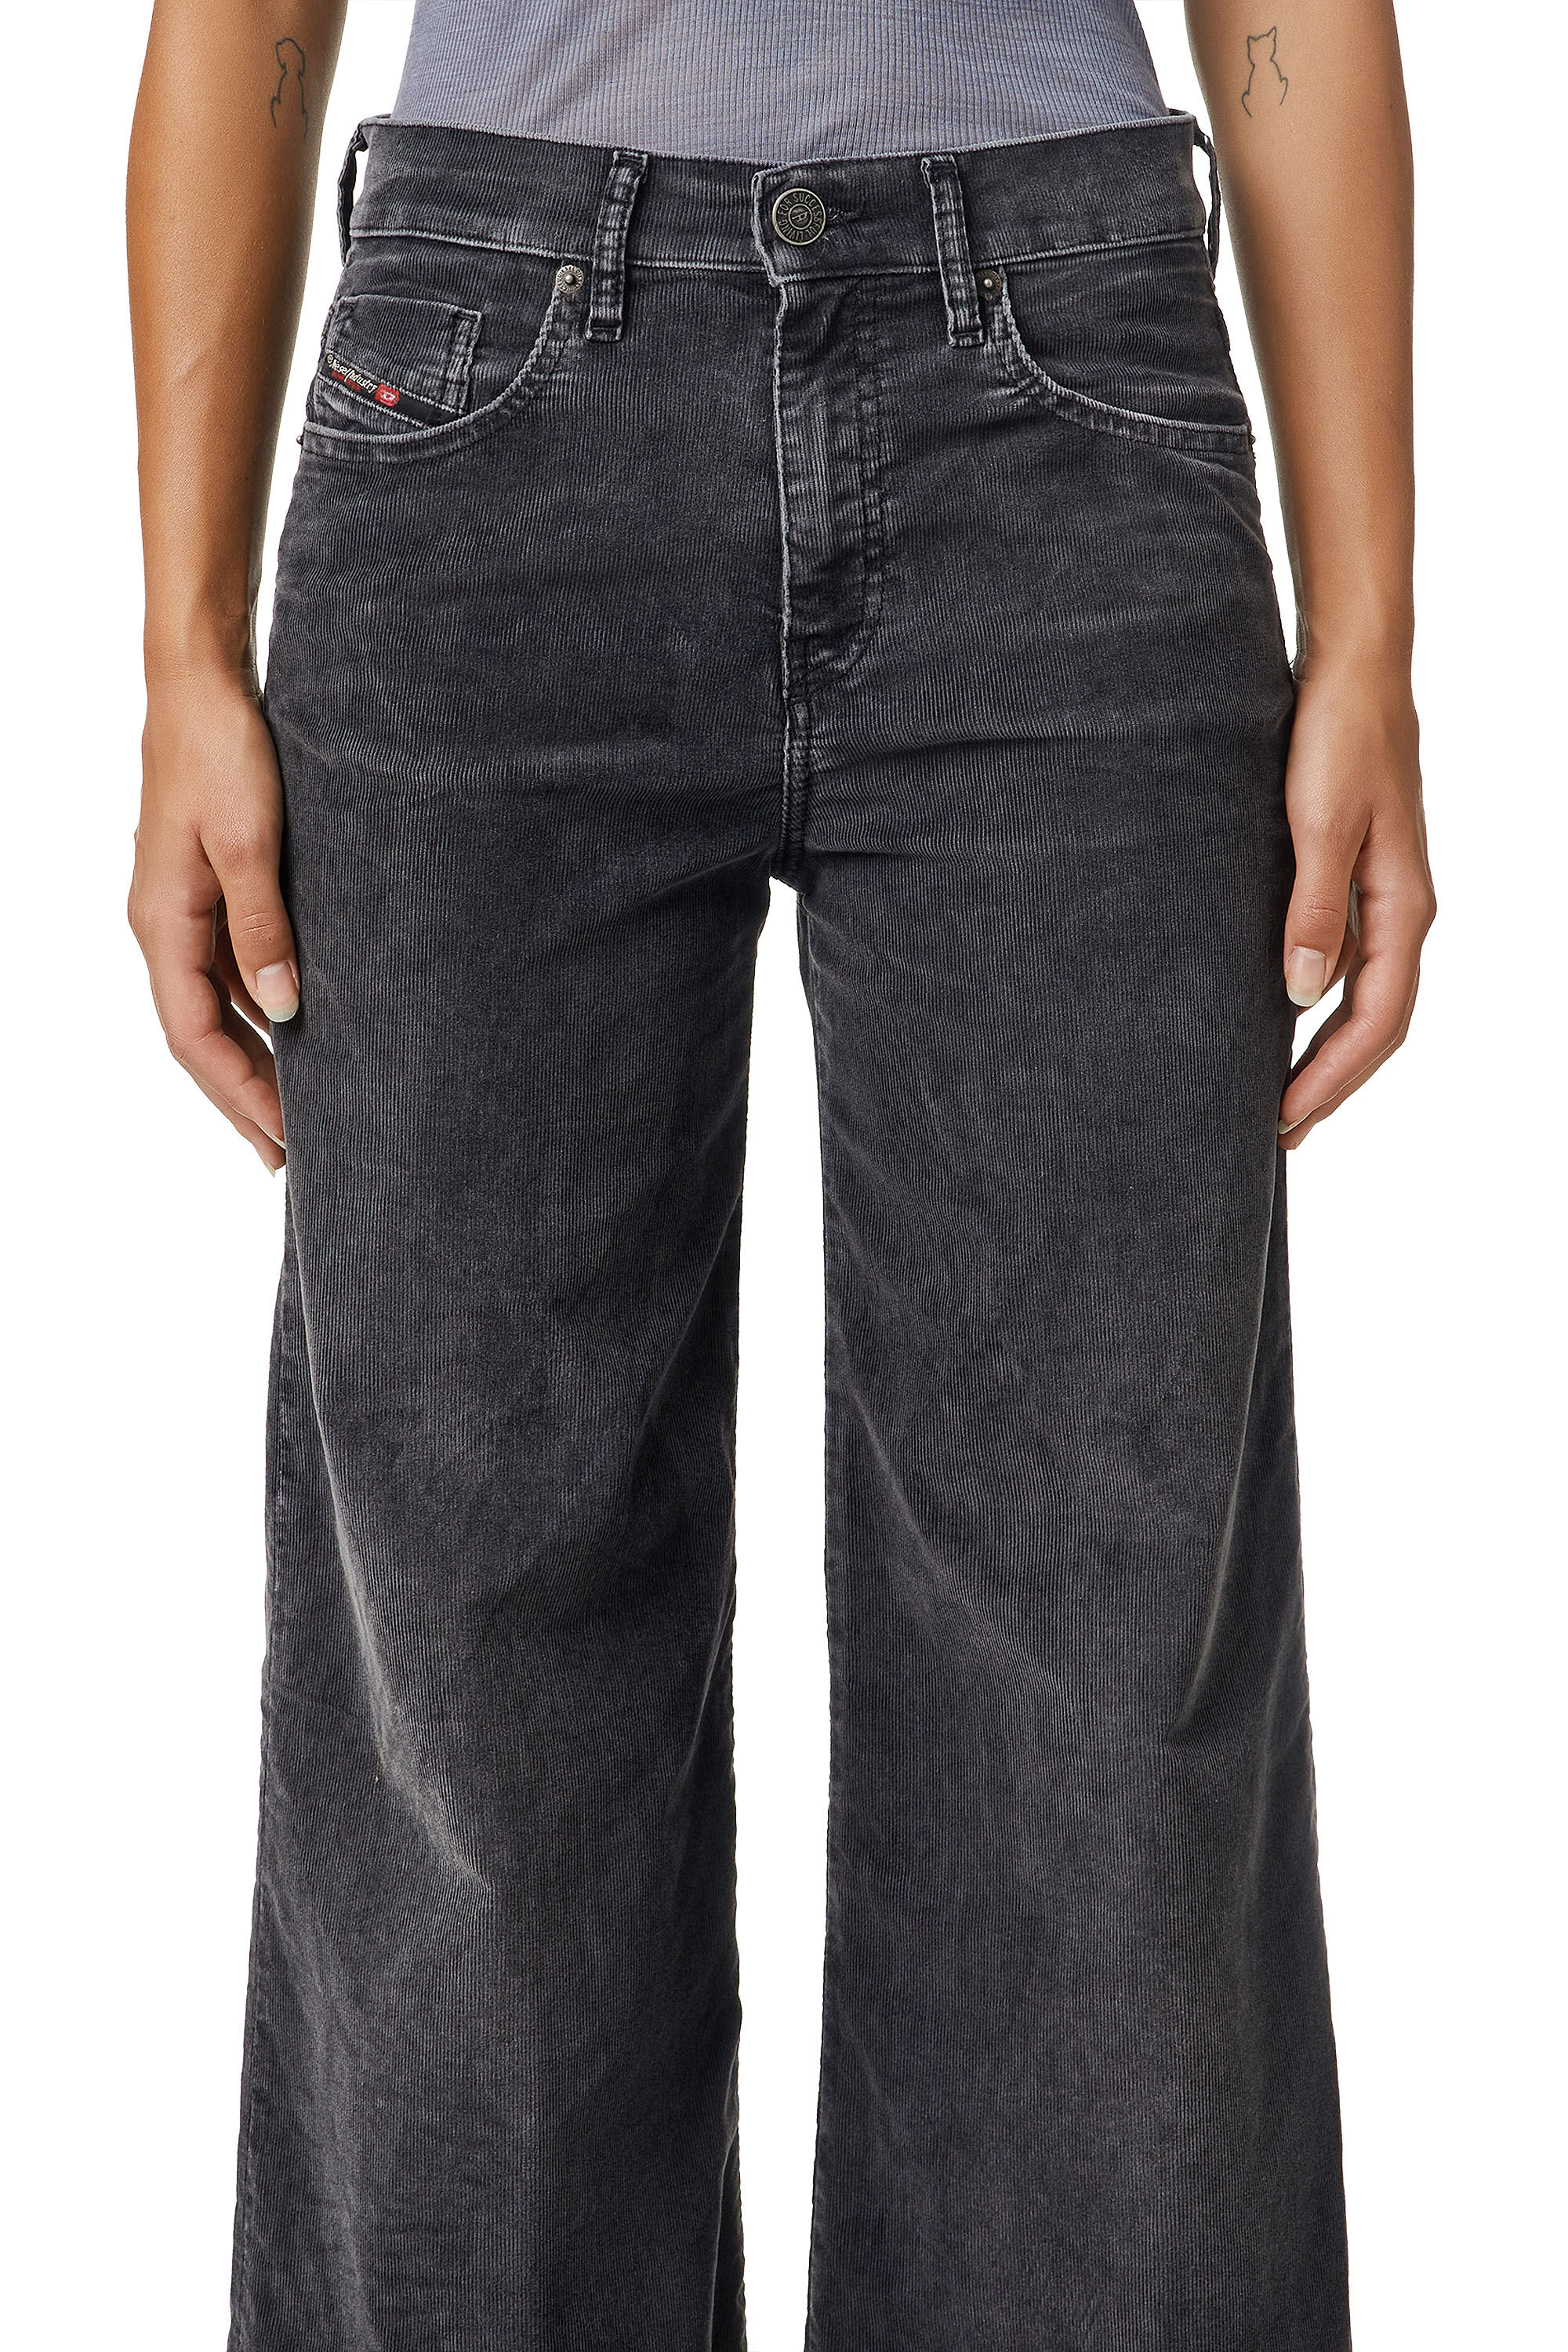 Diesel - D-Akemi 069YA Bootcut and Flare Jeans,  - Image 4